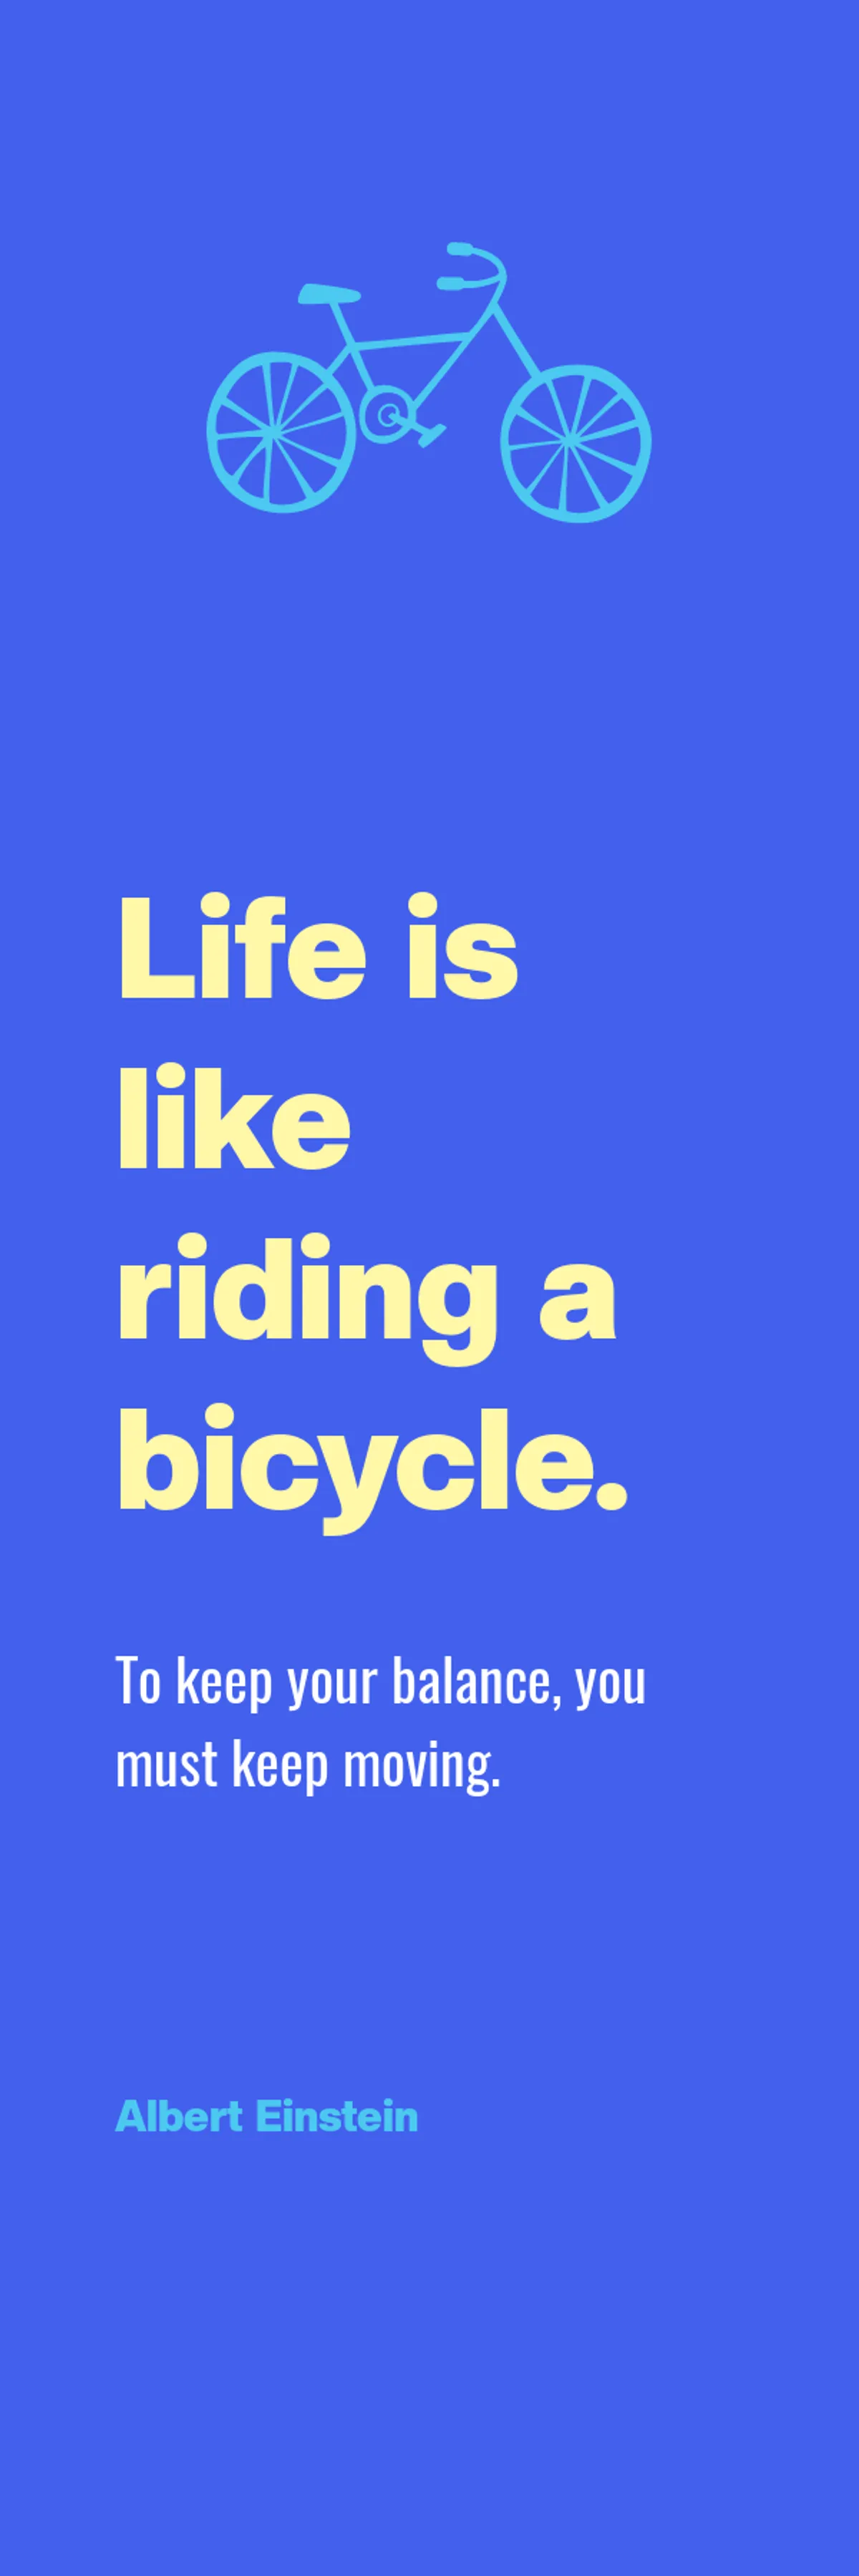 Life is like riding a bicycle.  To keep you balanced, you must keep going. - Albert Einstein